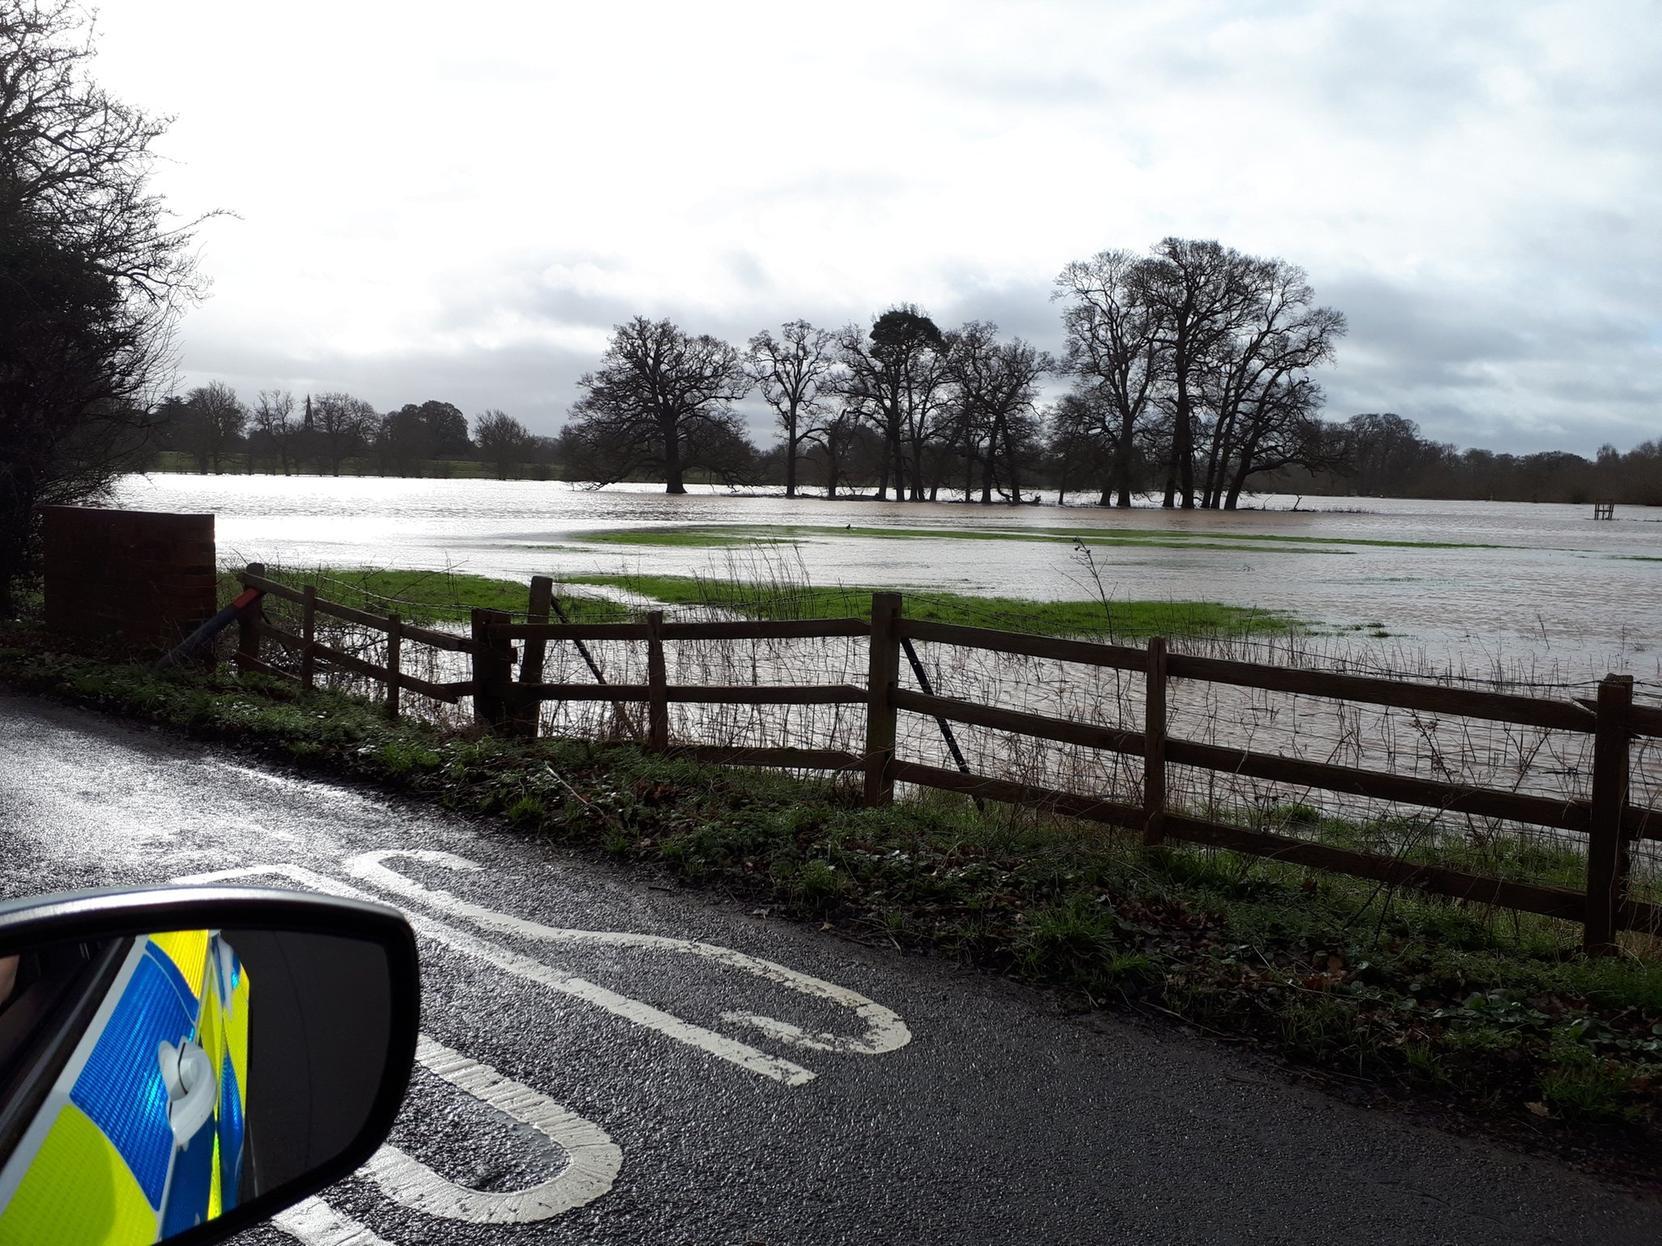 Flooded fields near Hampton Lucy and Charlecote (photo from Wellesbourne police Facebook)